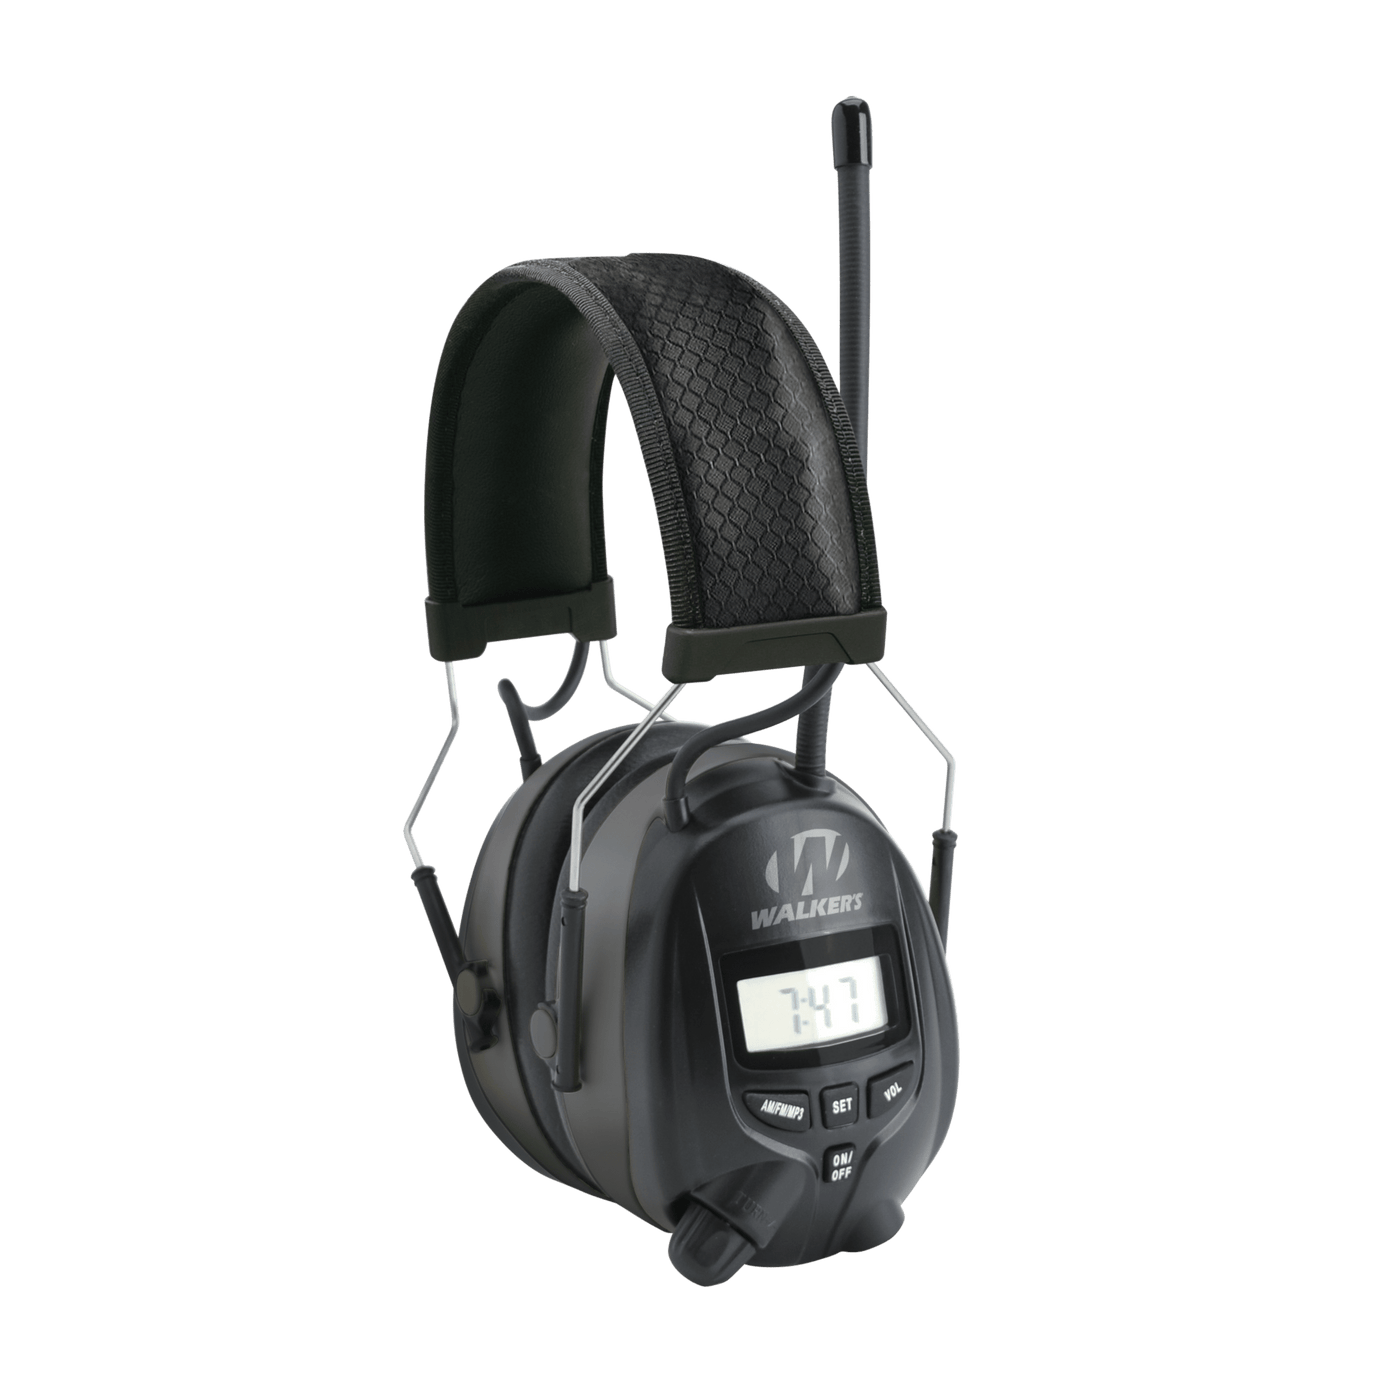 Walkers Walkers Muff With Am/fm Radio - & Phone Connection 25db Black Hearing And Eye Protection